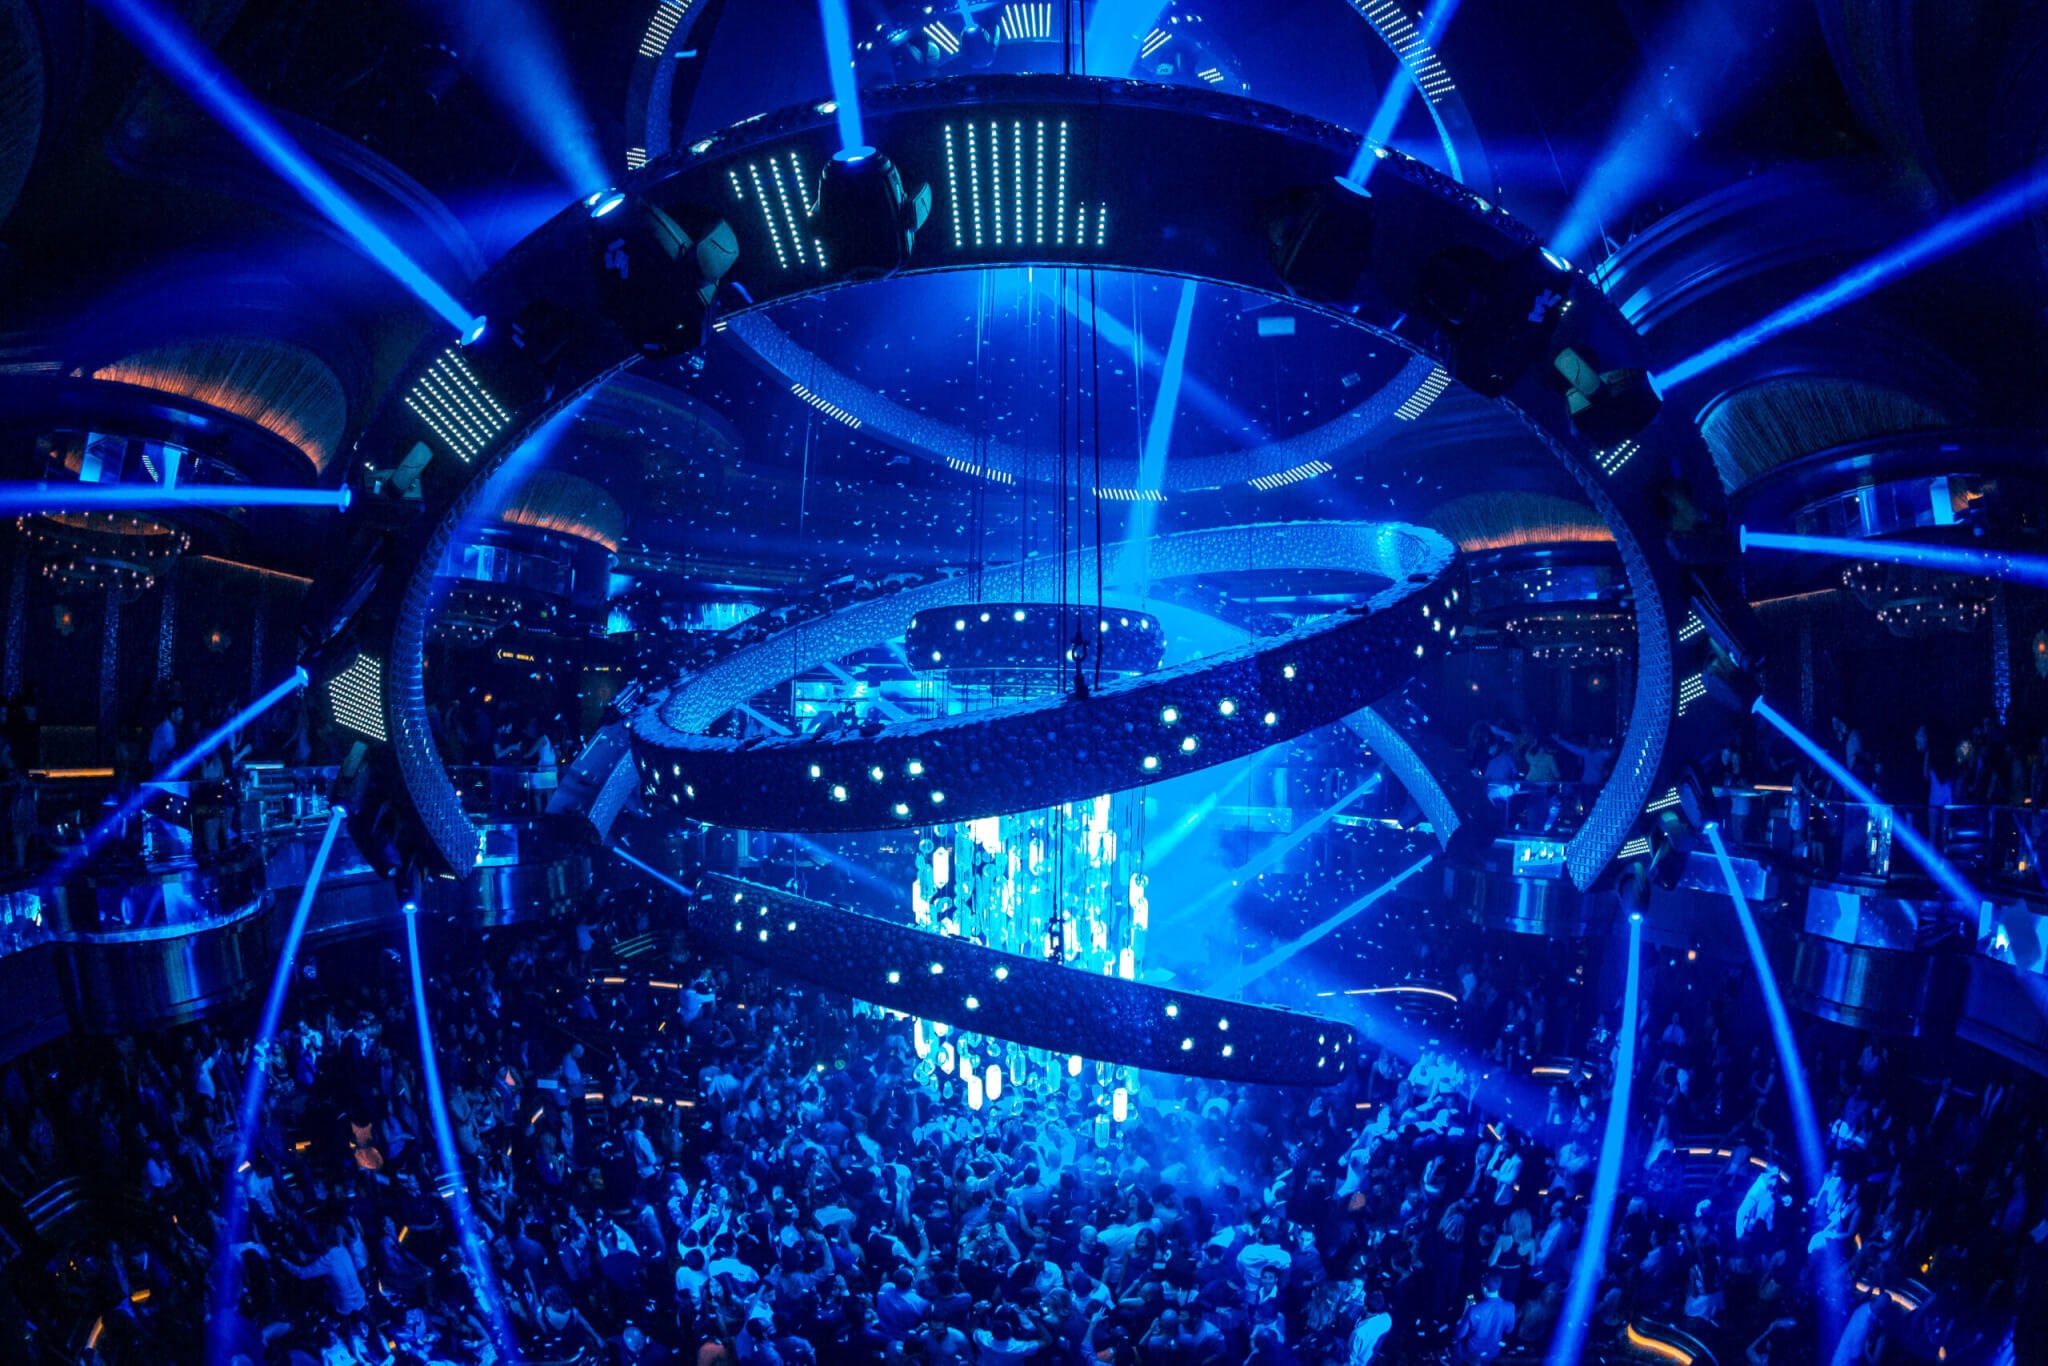 OMNIA Chandelier and Crowd